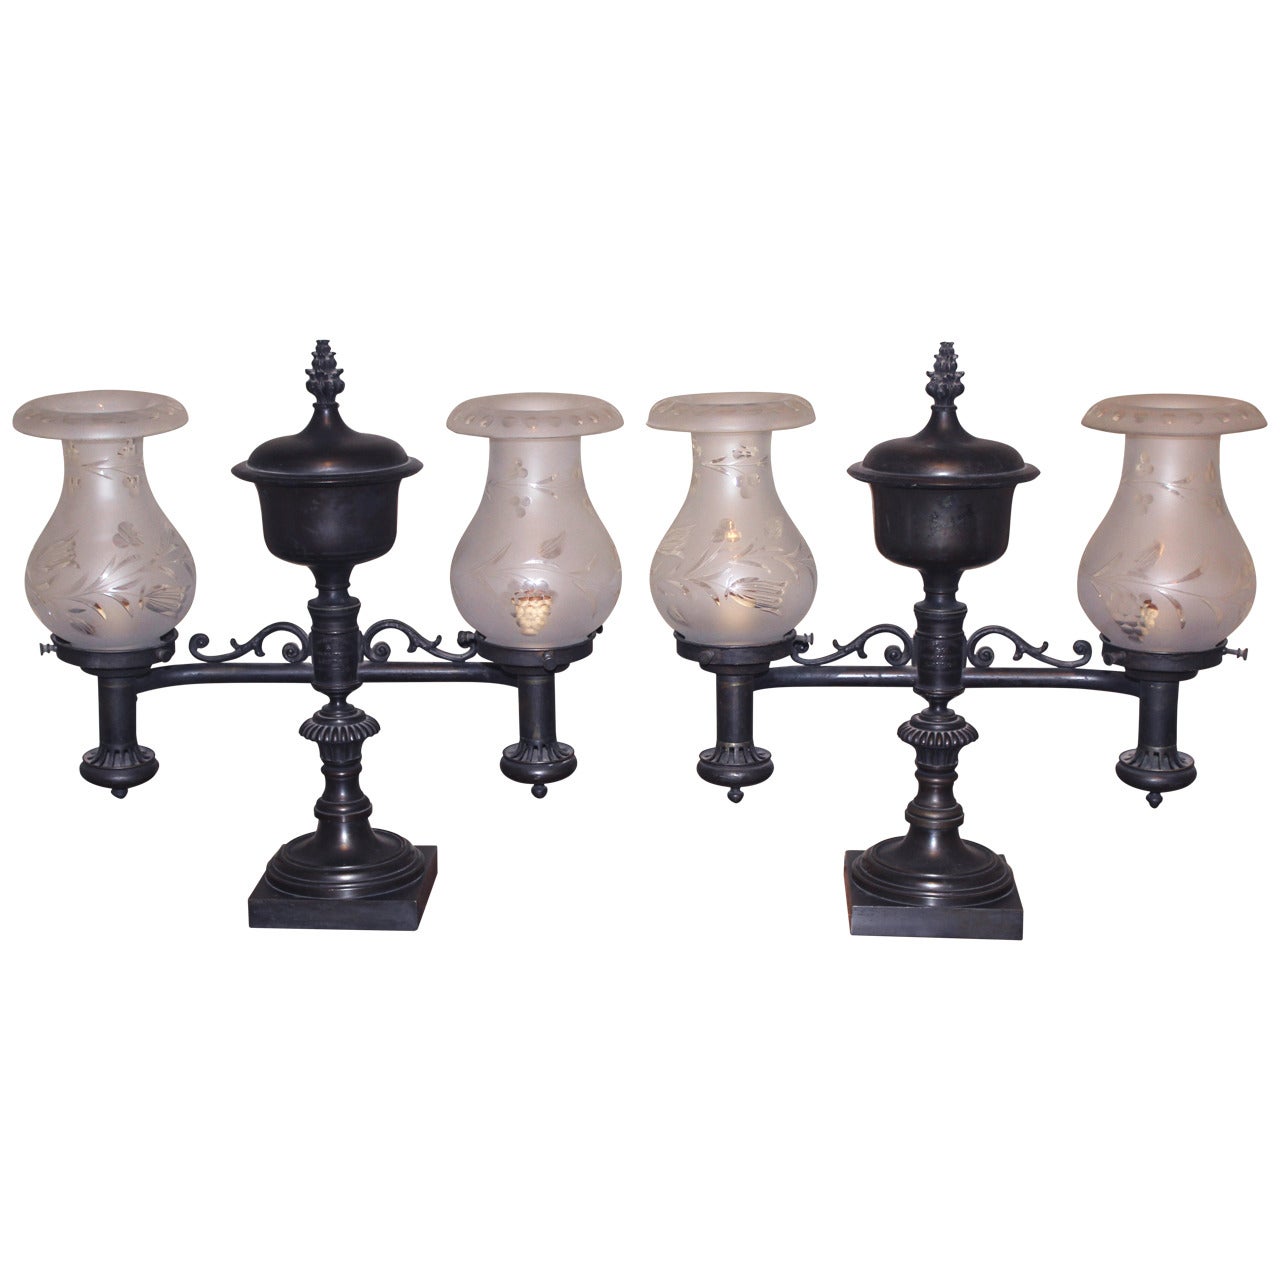 Pair of 19th Century English Bronze Double Burner Argand Lamps